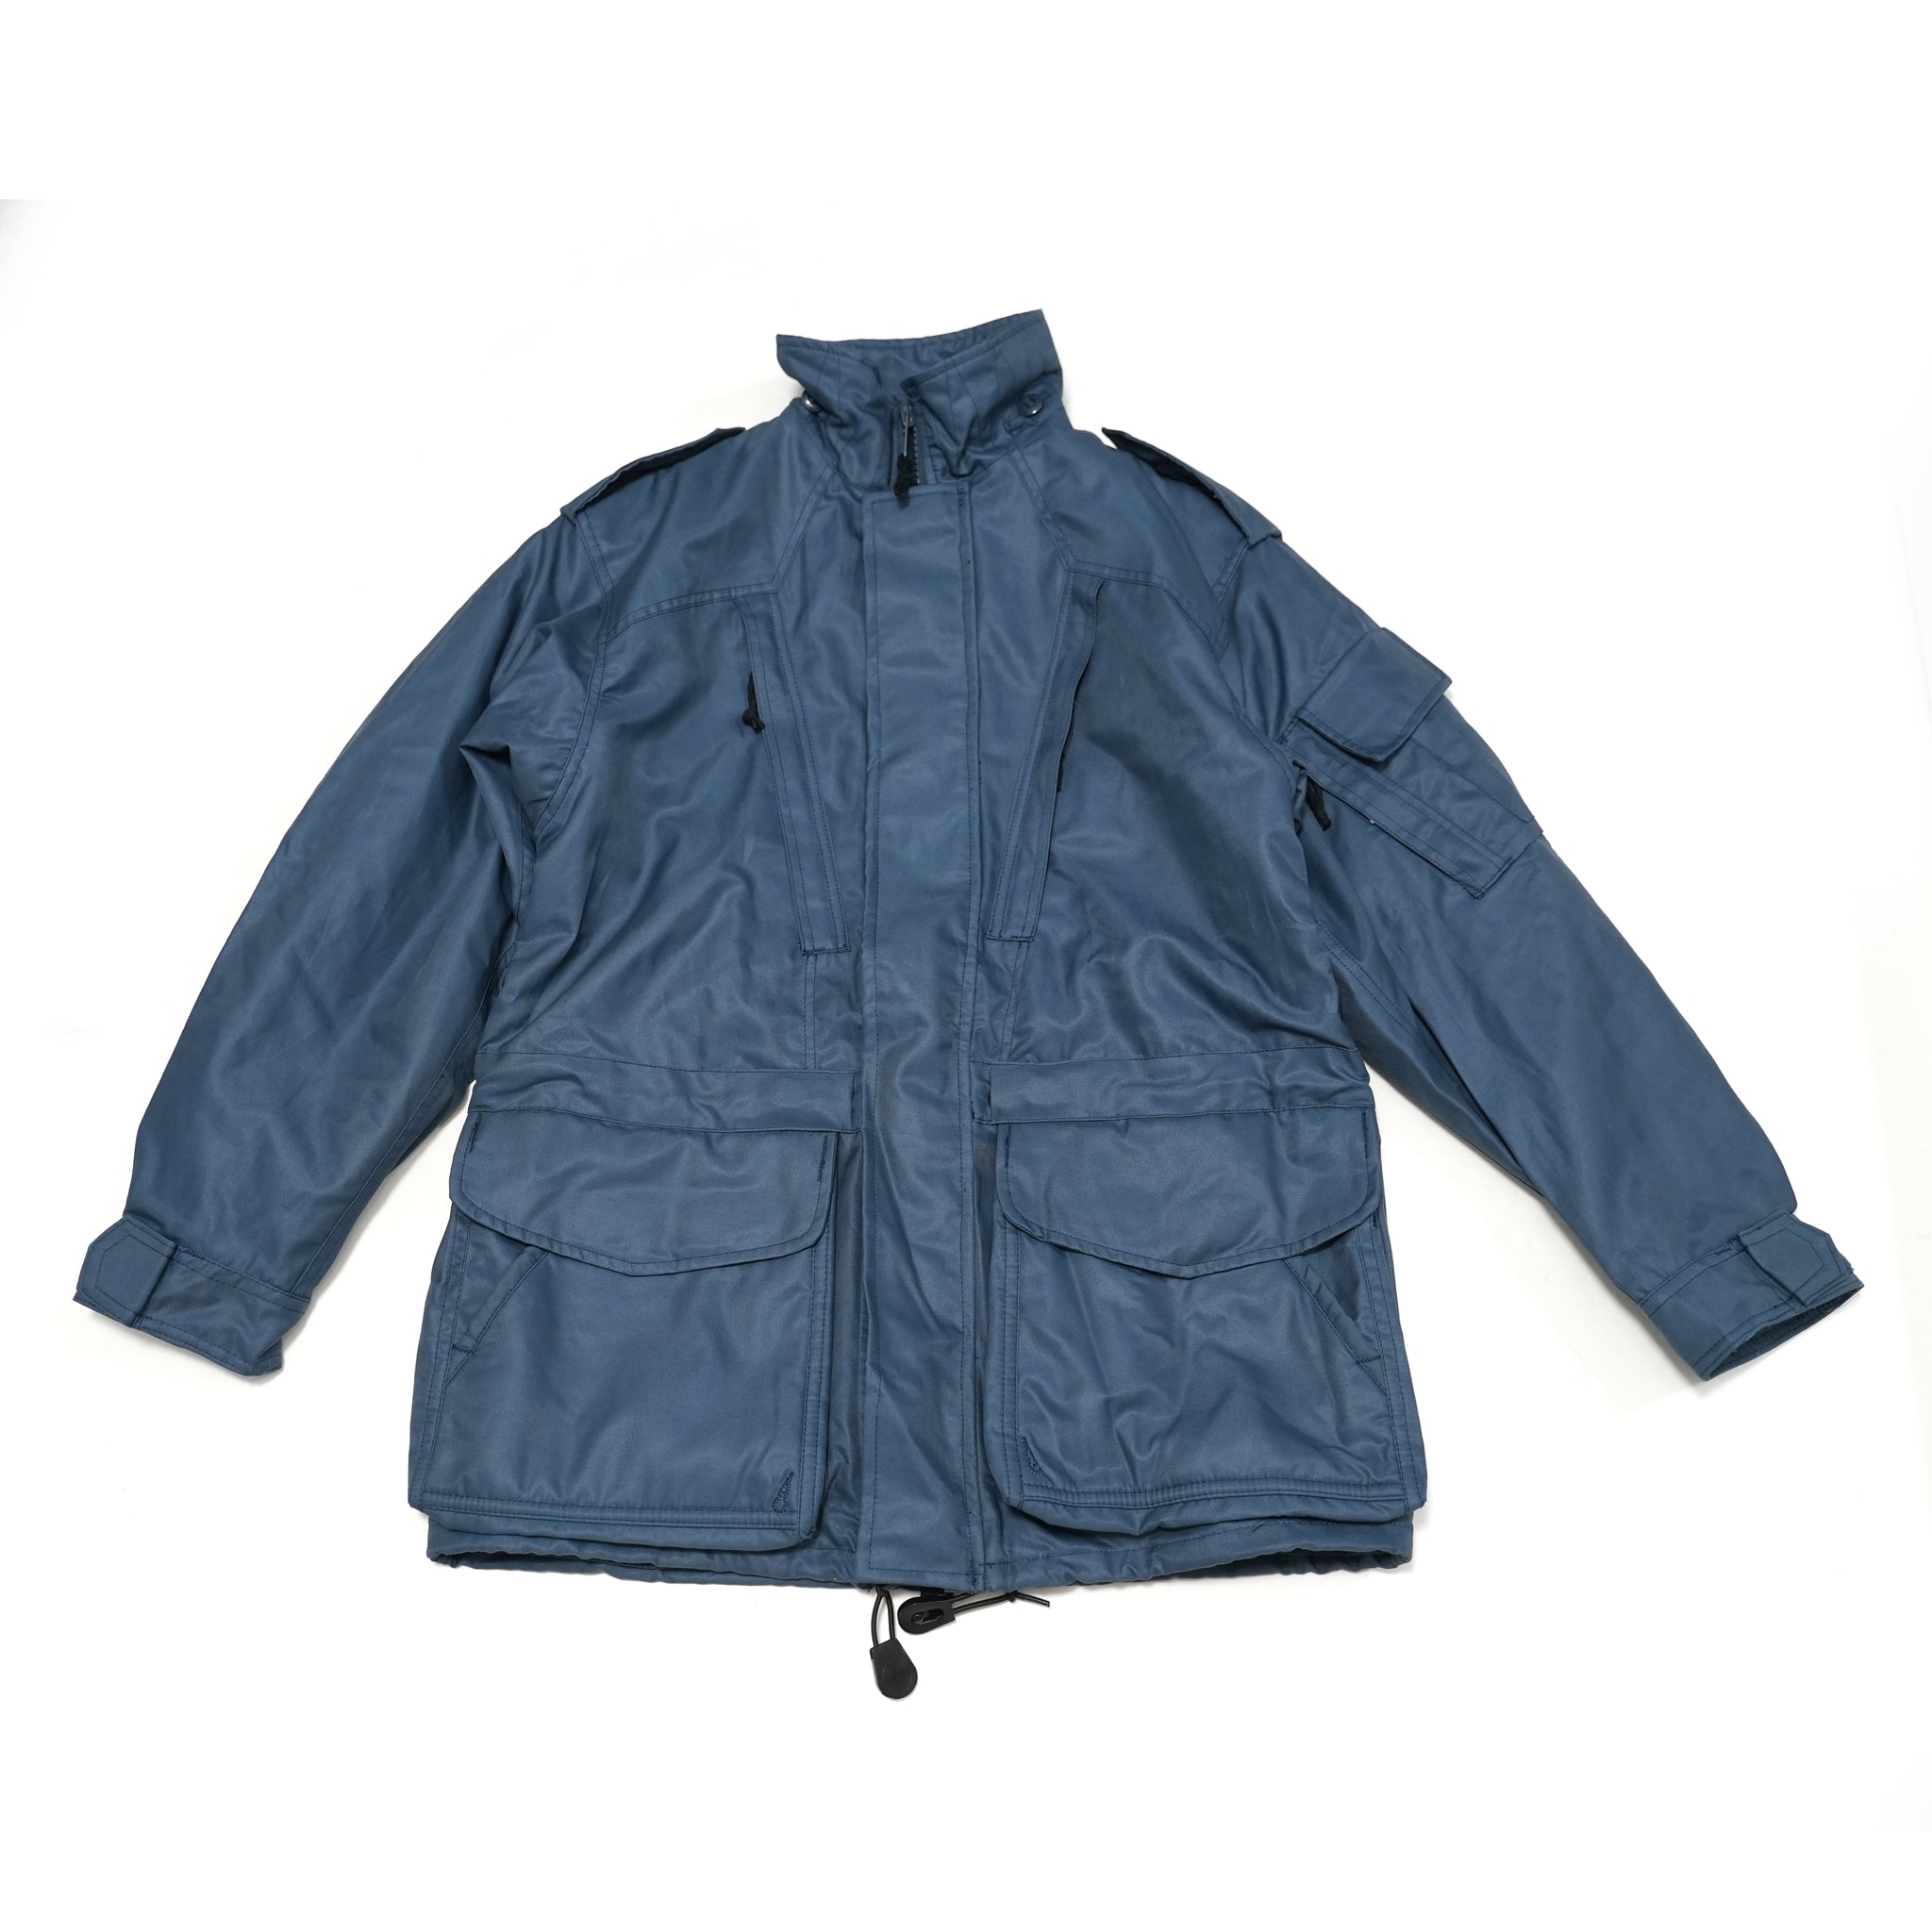 No:CO-RCAF | Name:ROYAL CANADIAN AIR FORCE コールド＆ウェットウェザーパーカ Dead Stock | Color:Blue 【 Dead Stock 】【カナダ軍】